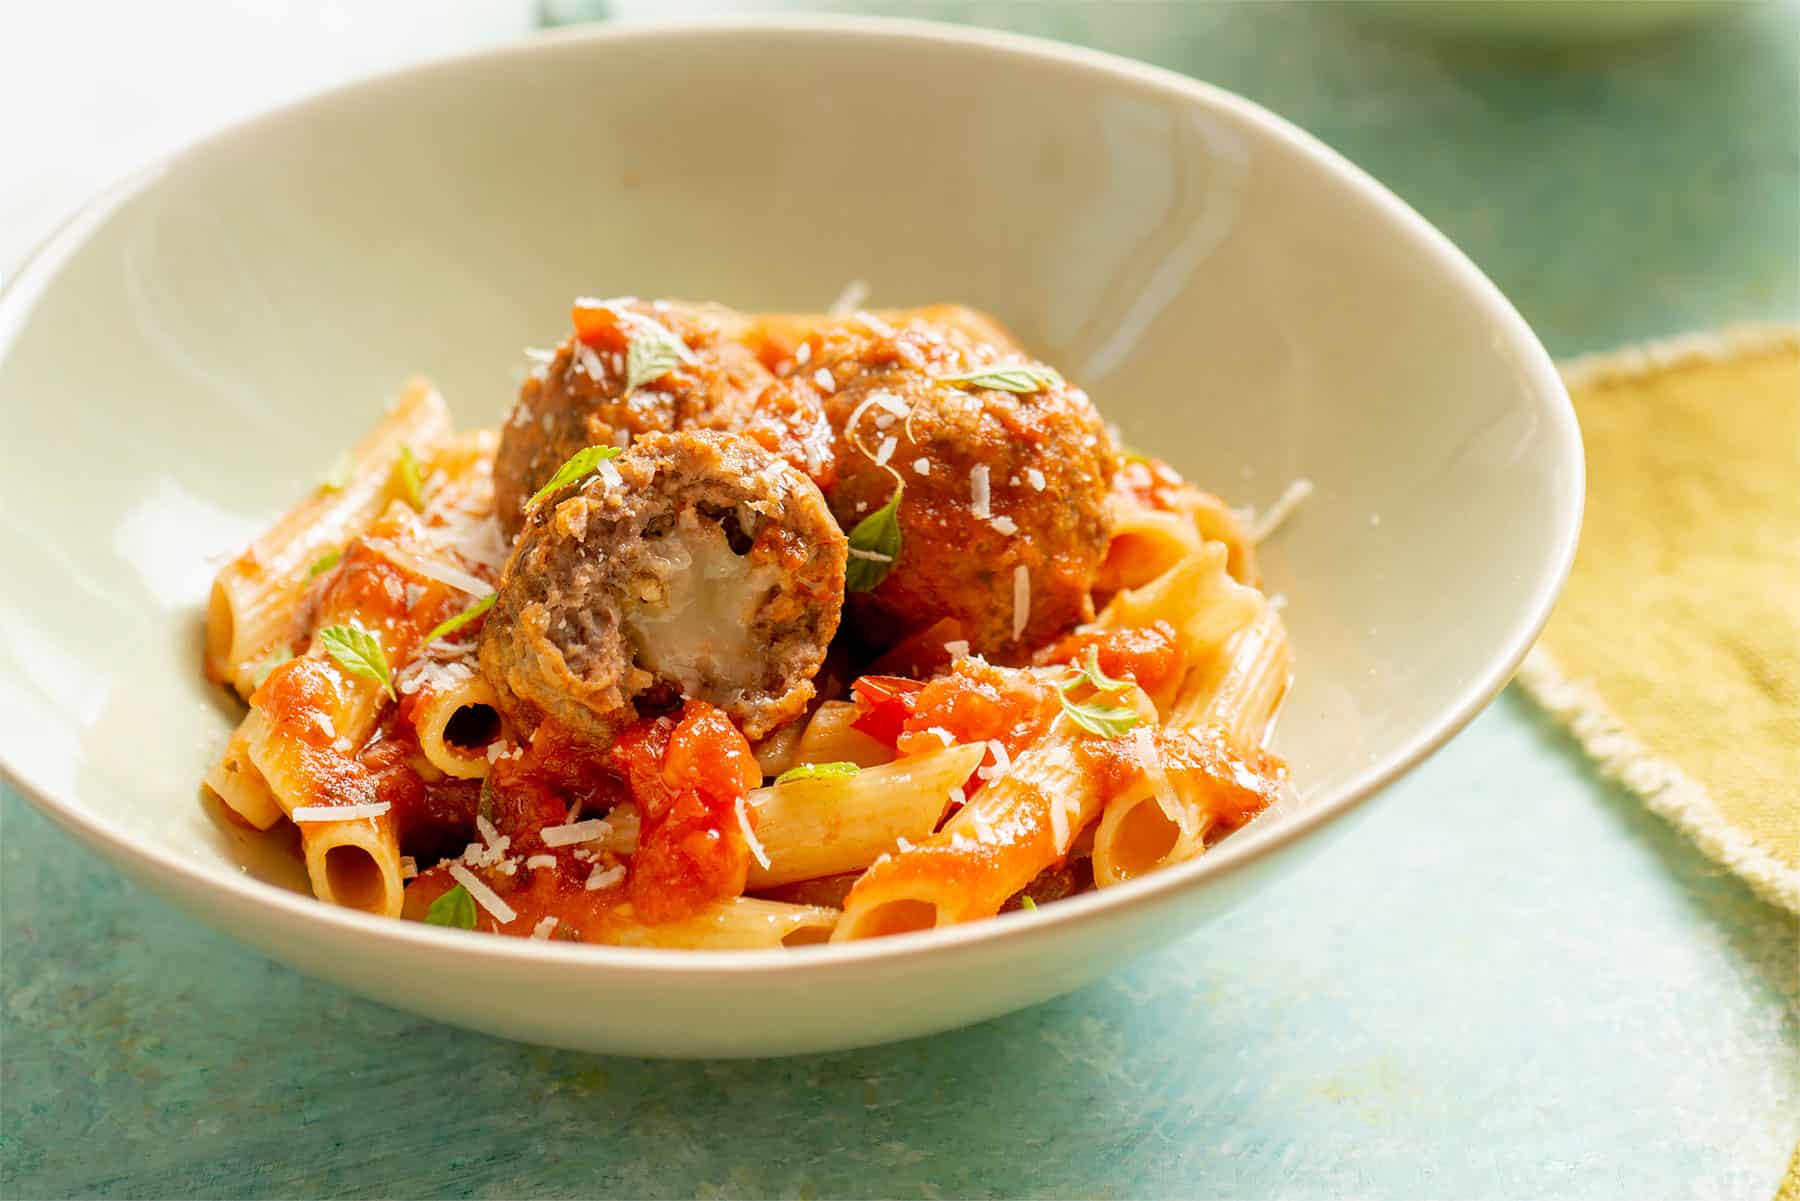 Meatballs with penne and tomato sauce.